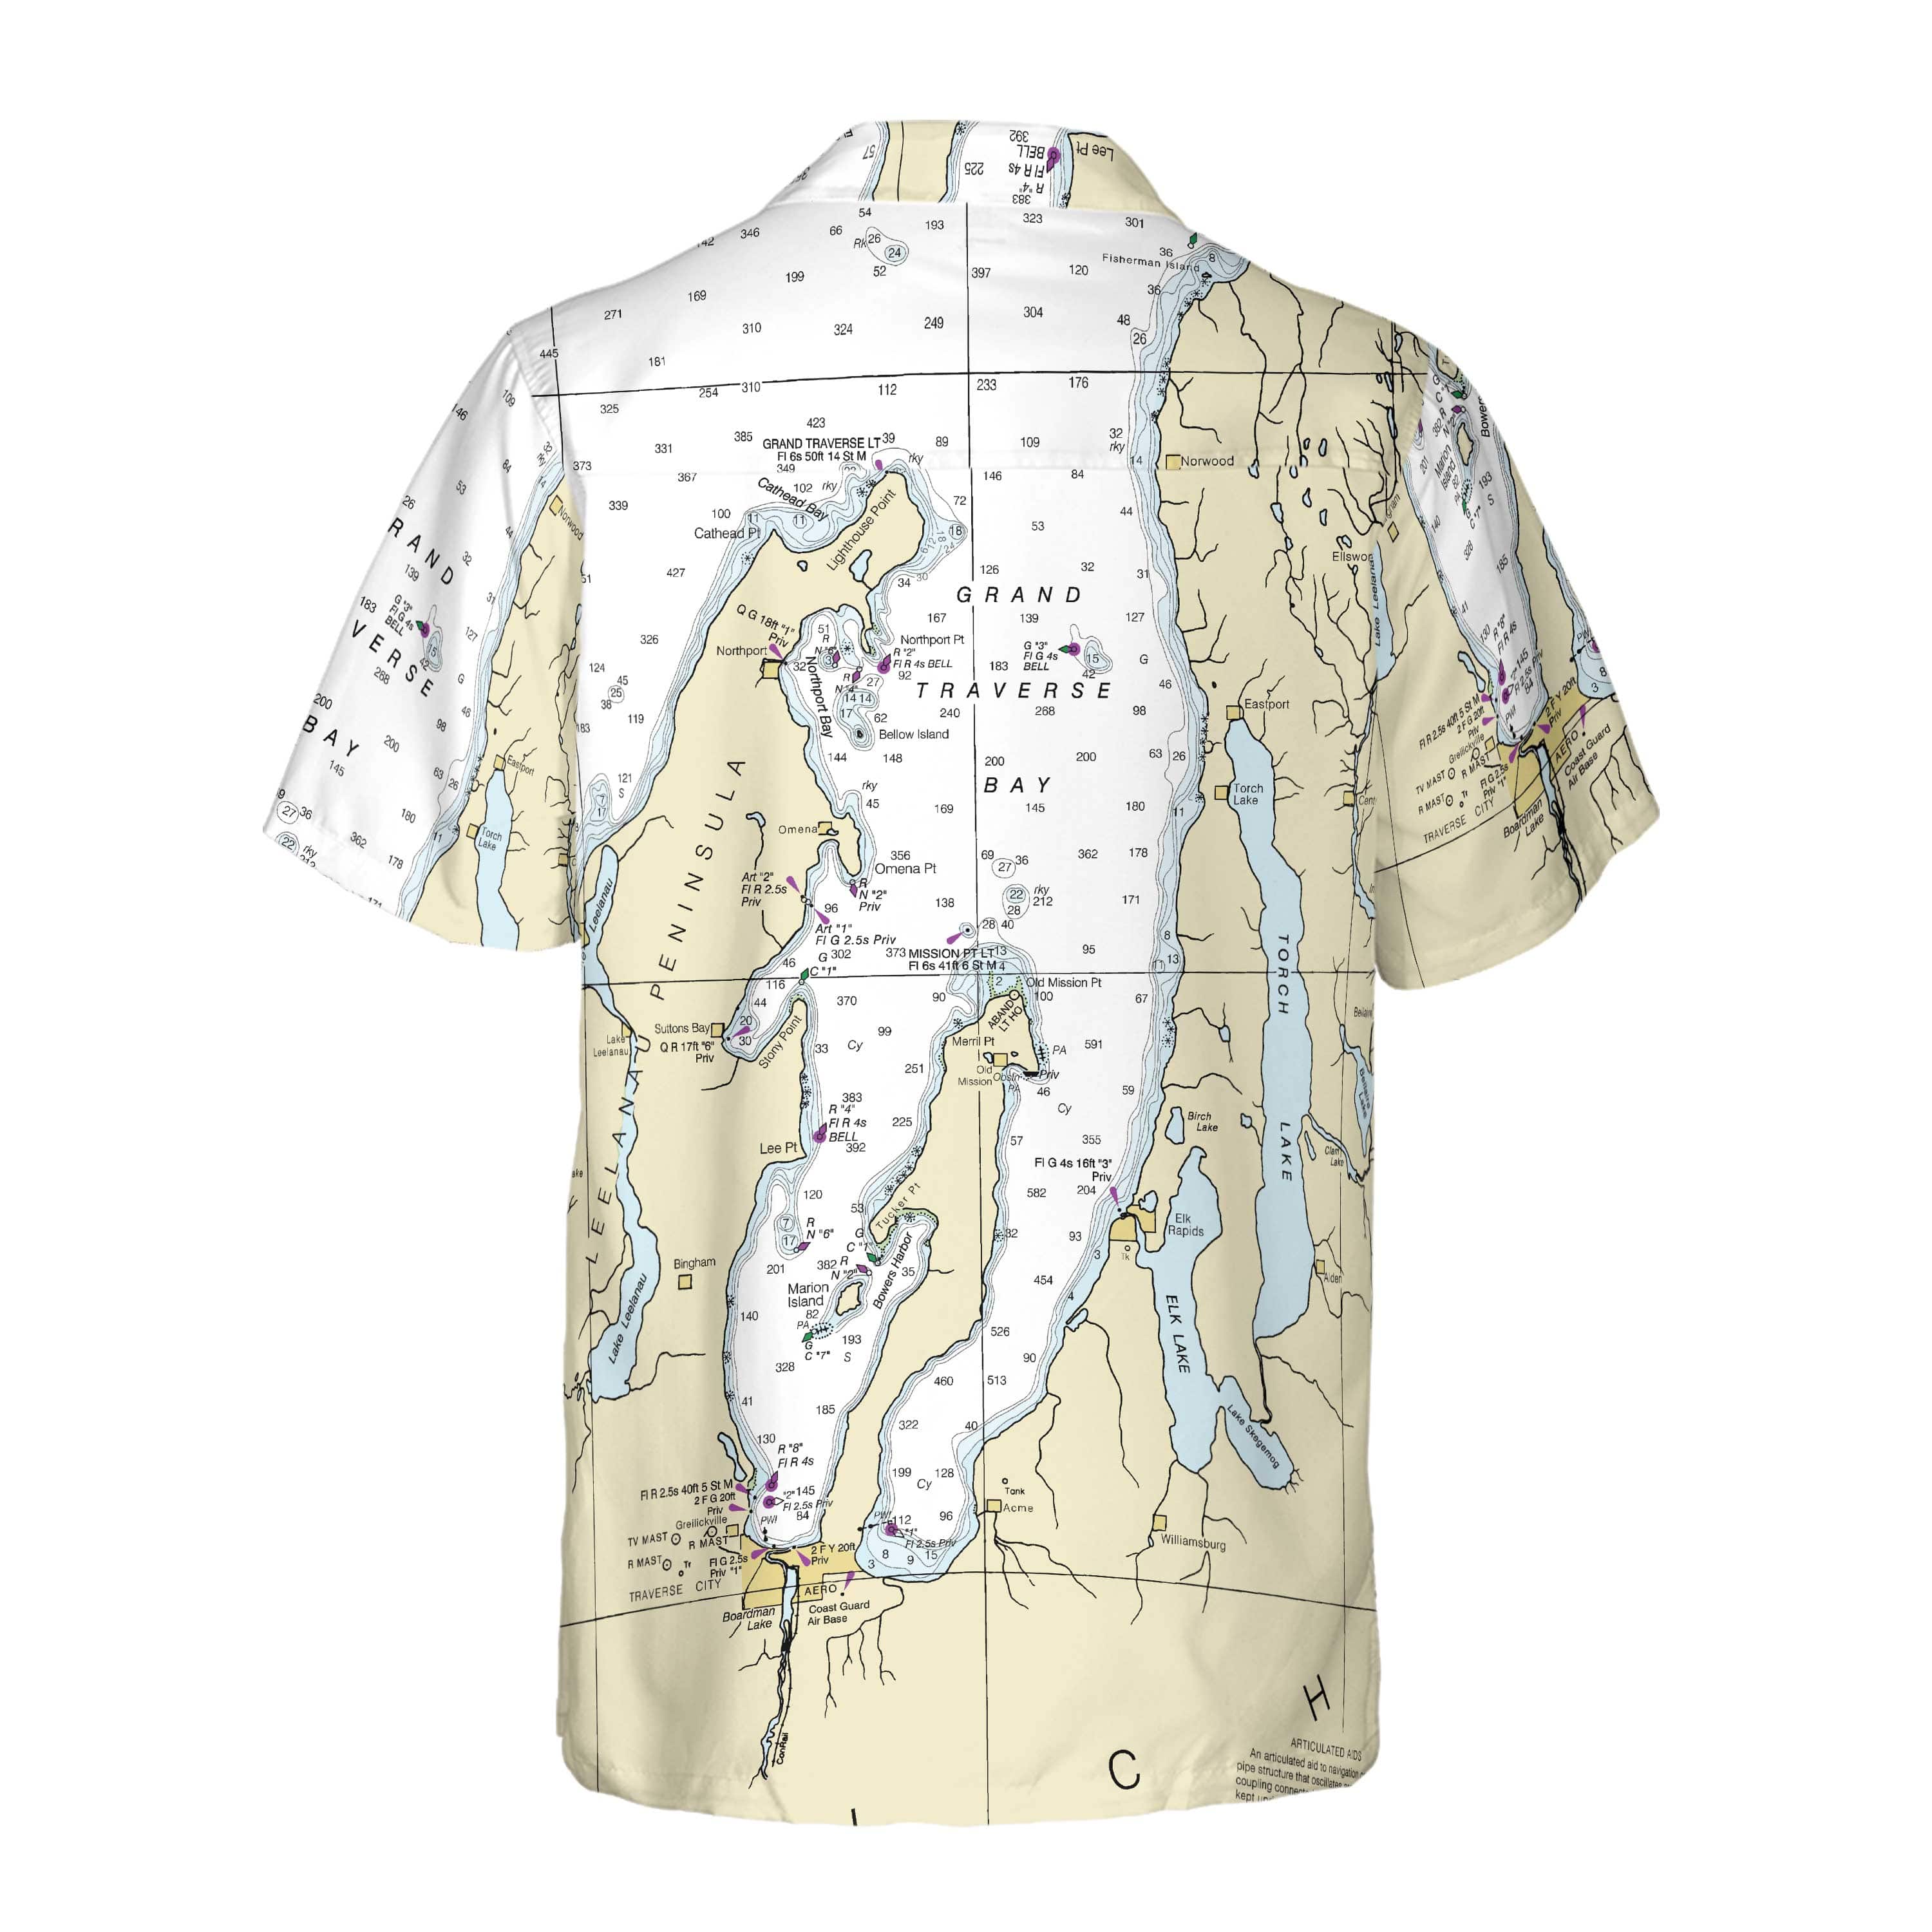 The Grand Traverse Bay Coconut Button Camp Shirt